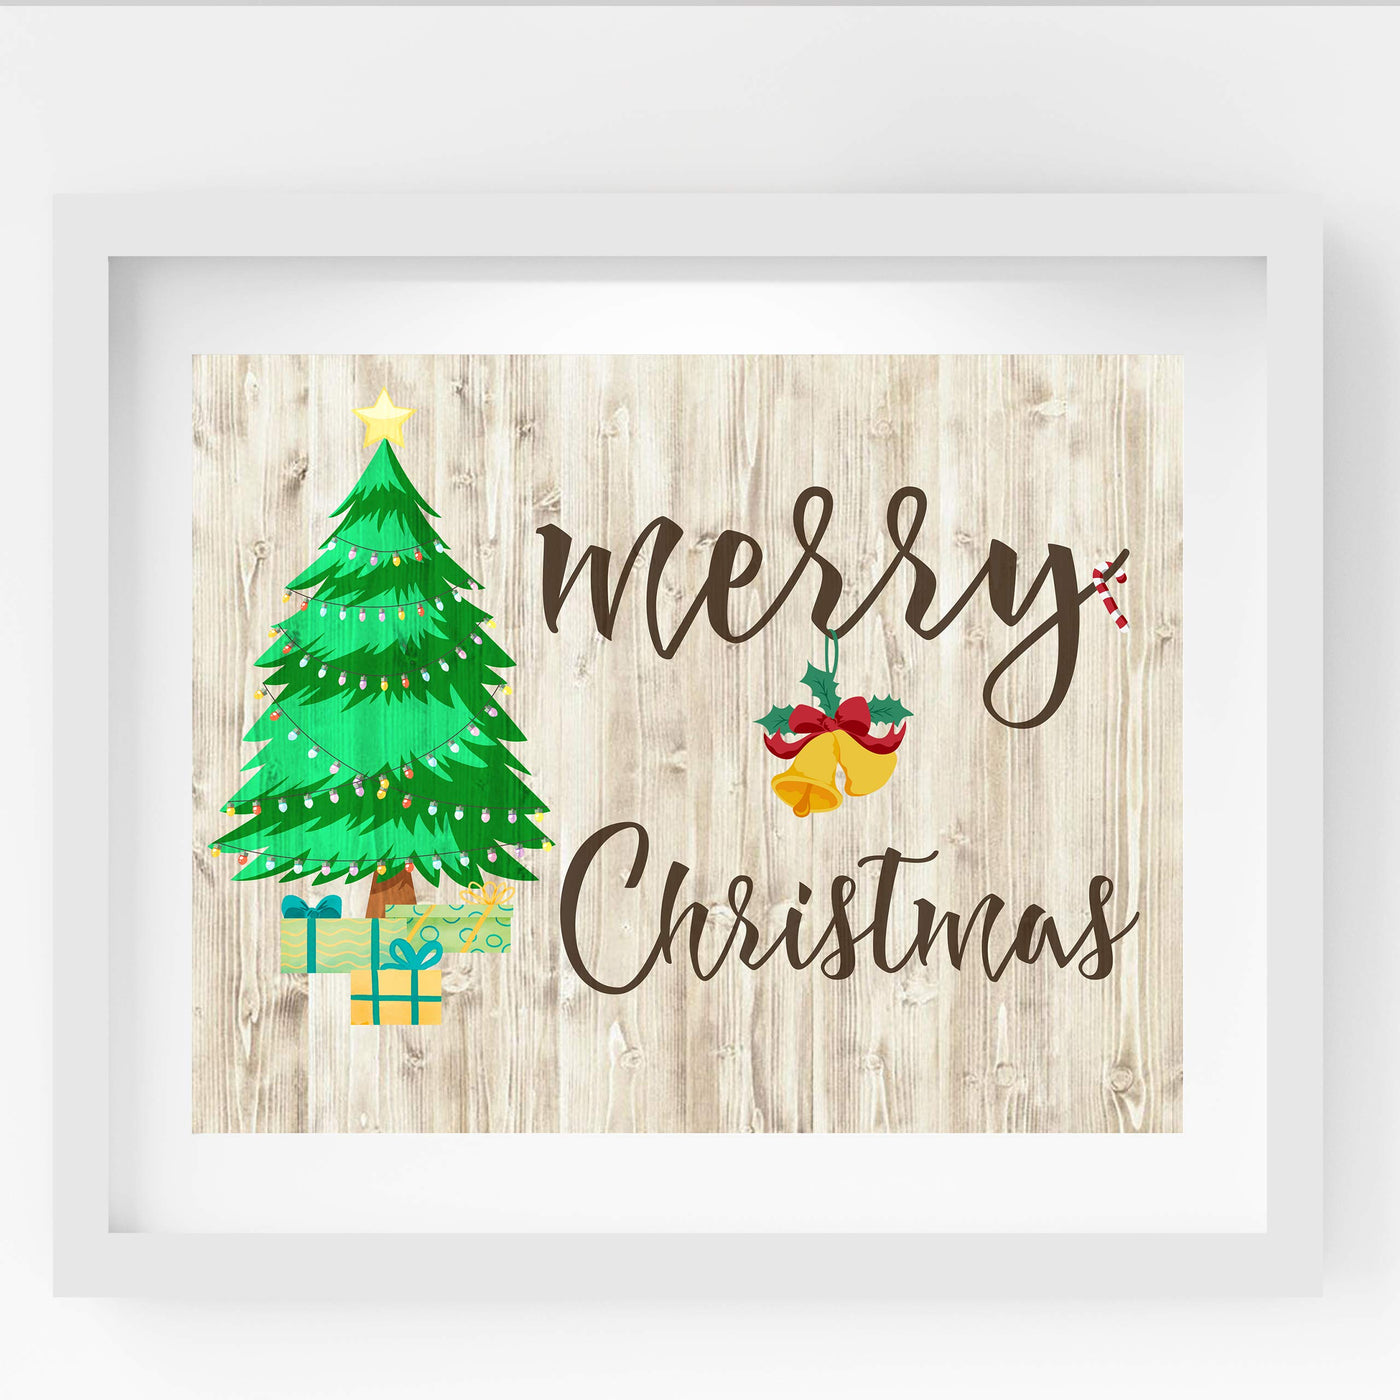 Merry Christmas Rustic Holiday Wall Decor -14 x 11" Festive Winter Art Print with Christmas Tree Image-Ready to Frame. Home-Kitchen-Farmhouse-Welcome Decor. Great Christian Gift! Printed on Paper.